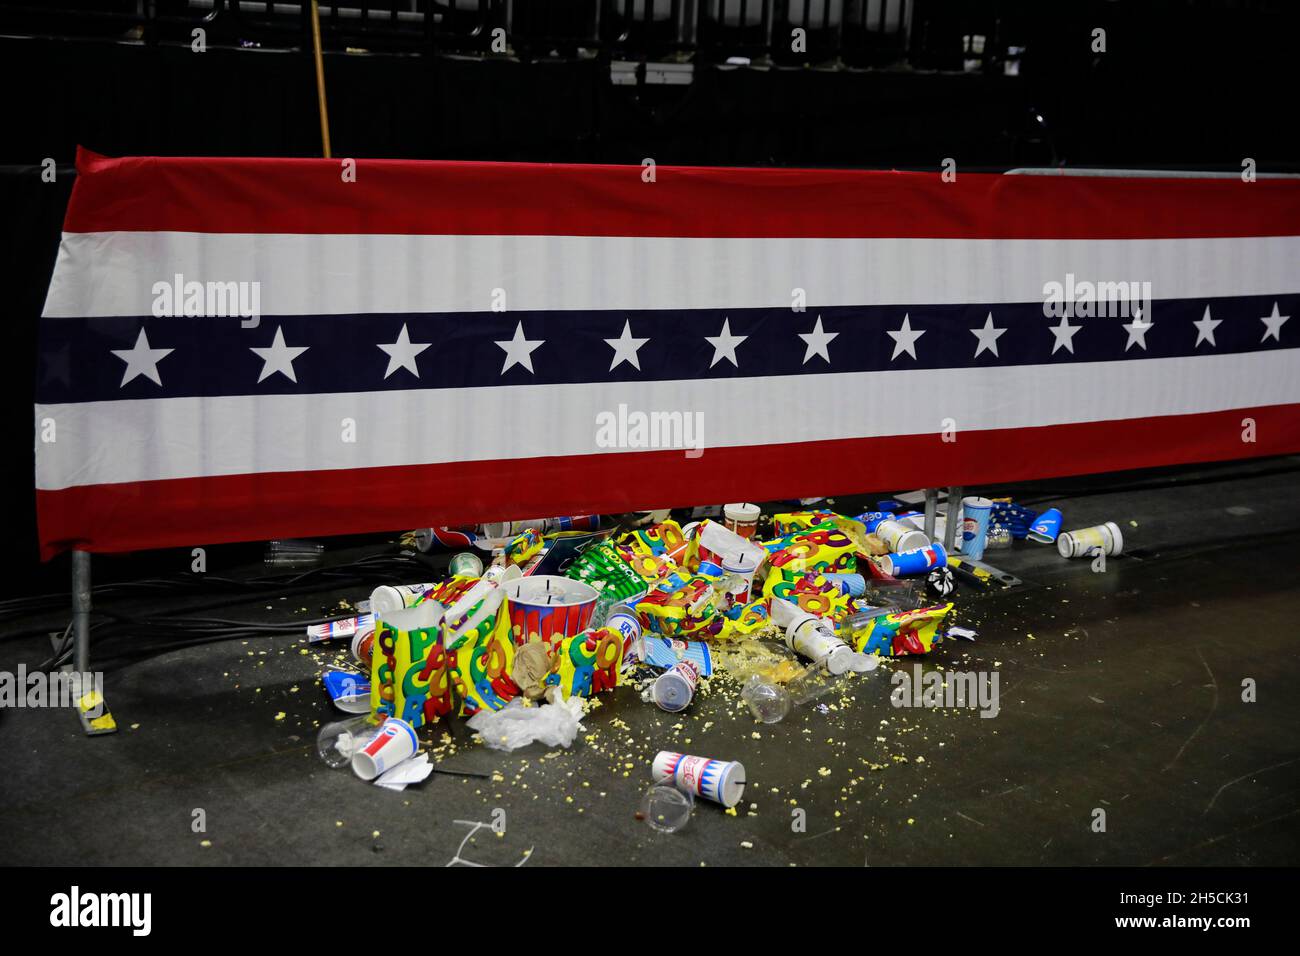 11052018 - Fort Wayne, Indiana, USA: Popcorn and garbage litters the floor after United States President Donald J. Trump campaigned for Indiana congressional candidates during a Make America Great Again! rally at the Allen County War Memorial Coliseum in Fort Wayne, Indiana. Stock Photo